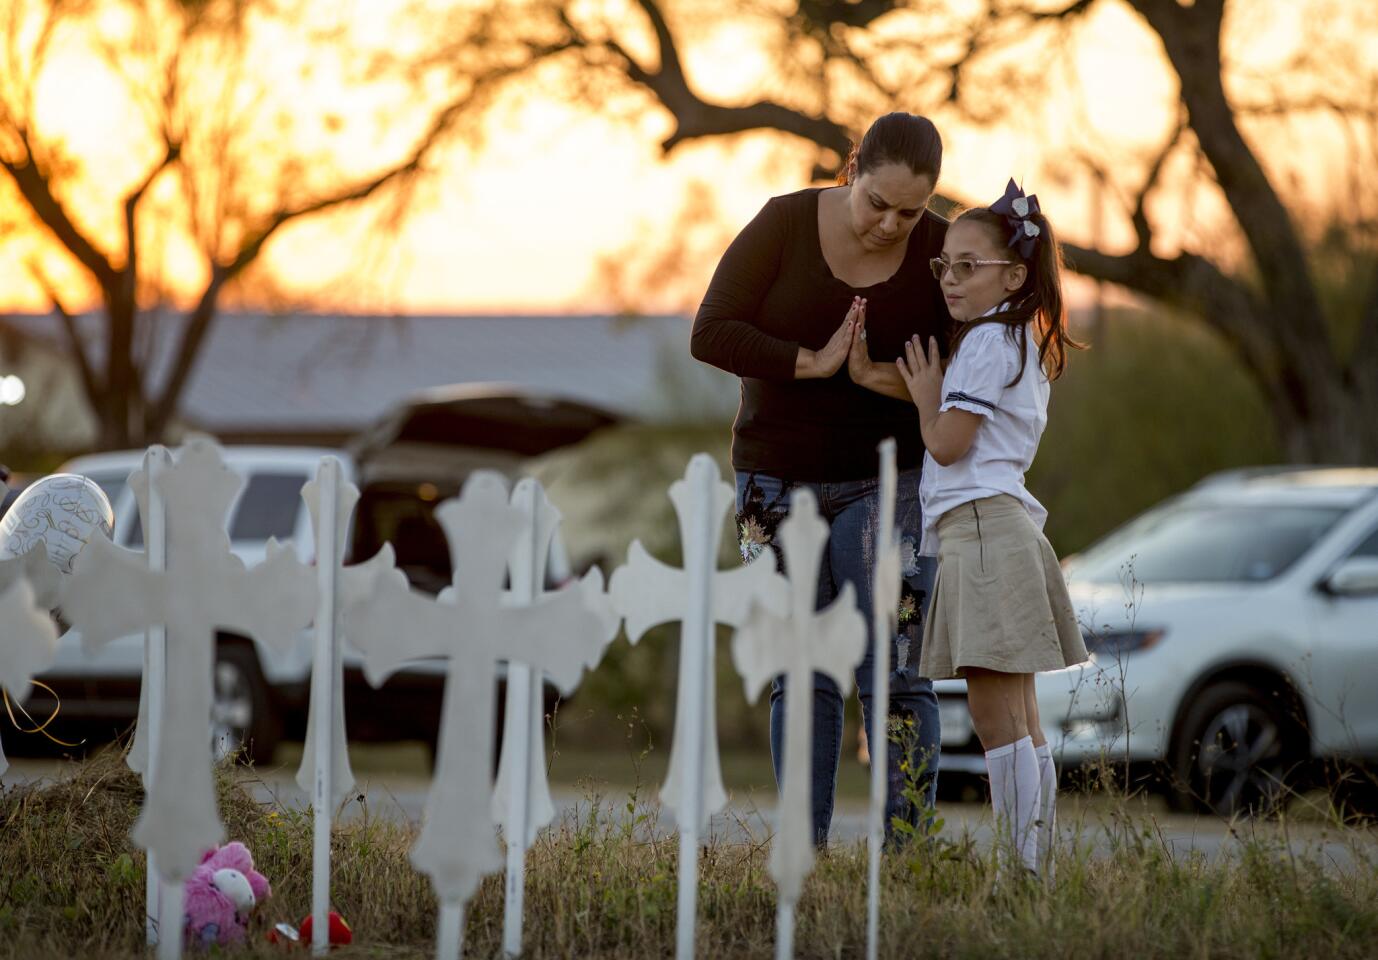 Meredith Cooper, of San Antonio, Texas, and her 8-year-old daughter, Heather, visit a memorial of 26 metal crosses near First Baptist Church in Sutherland Springs, Texas, on Nov. 6, 2017.